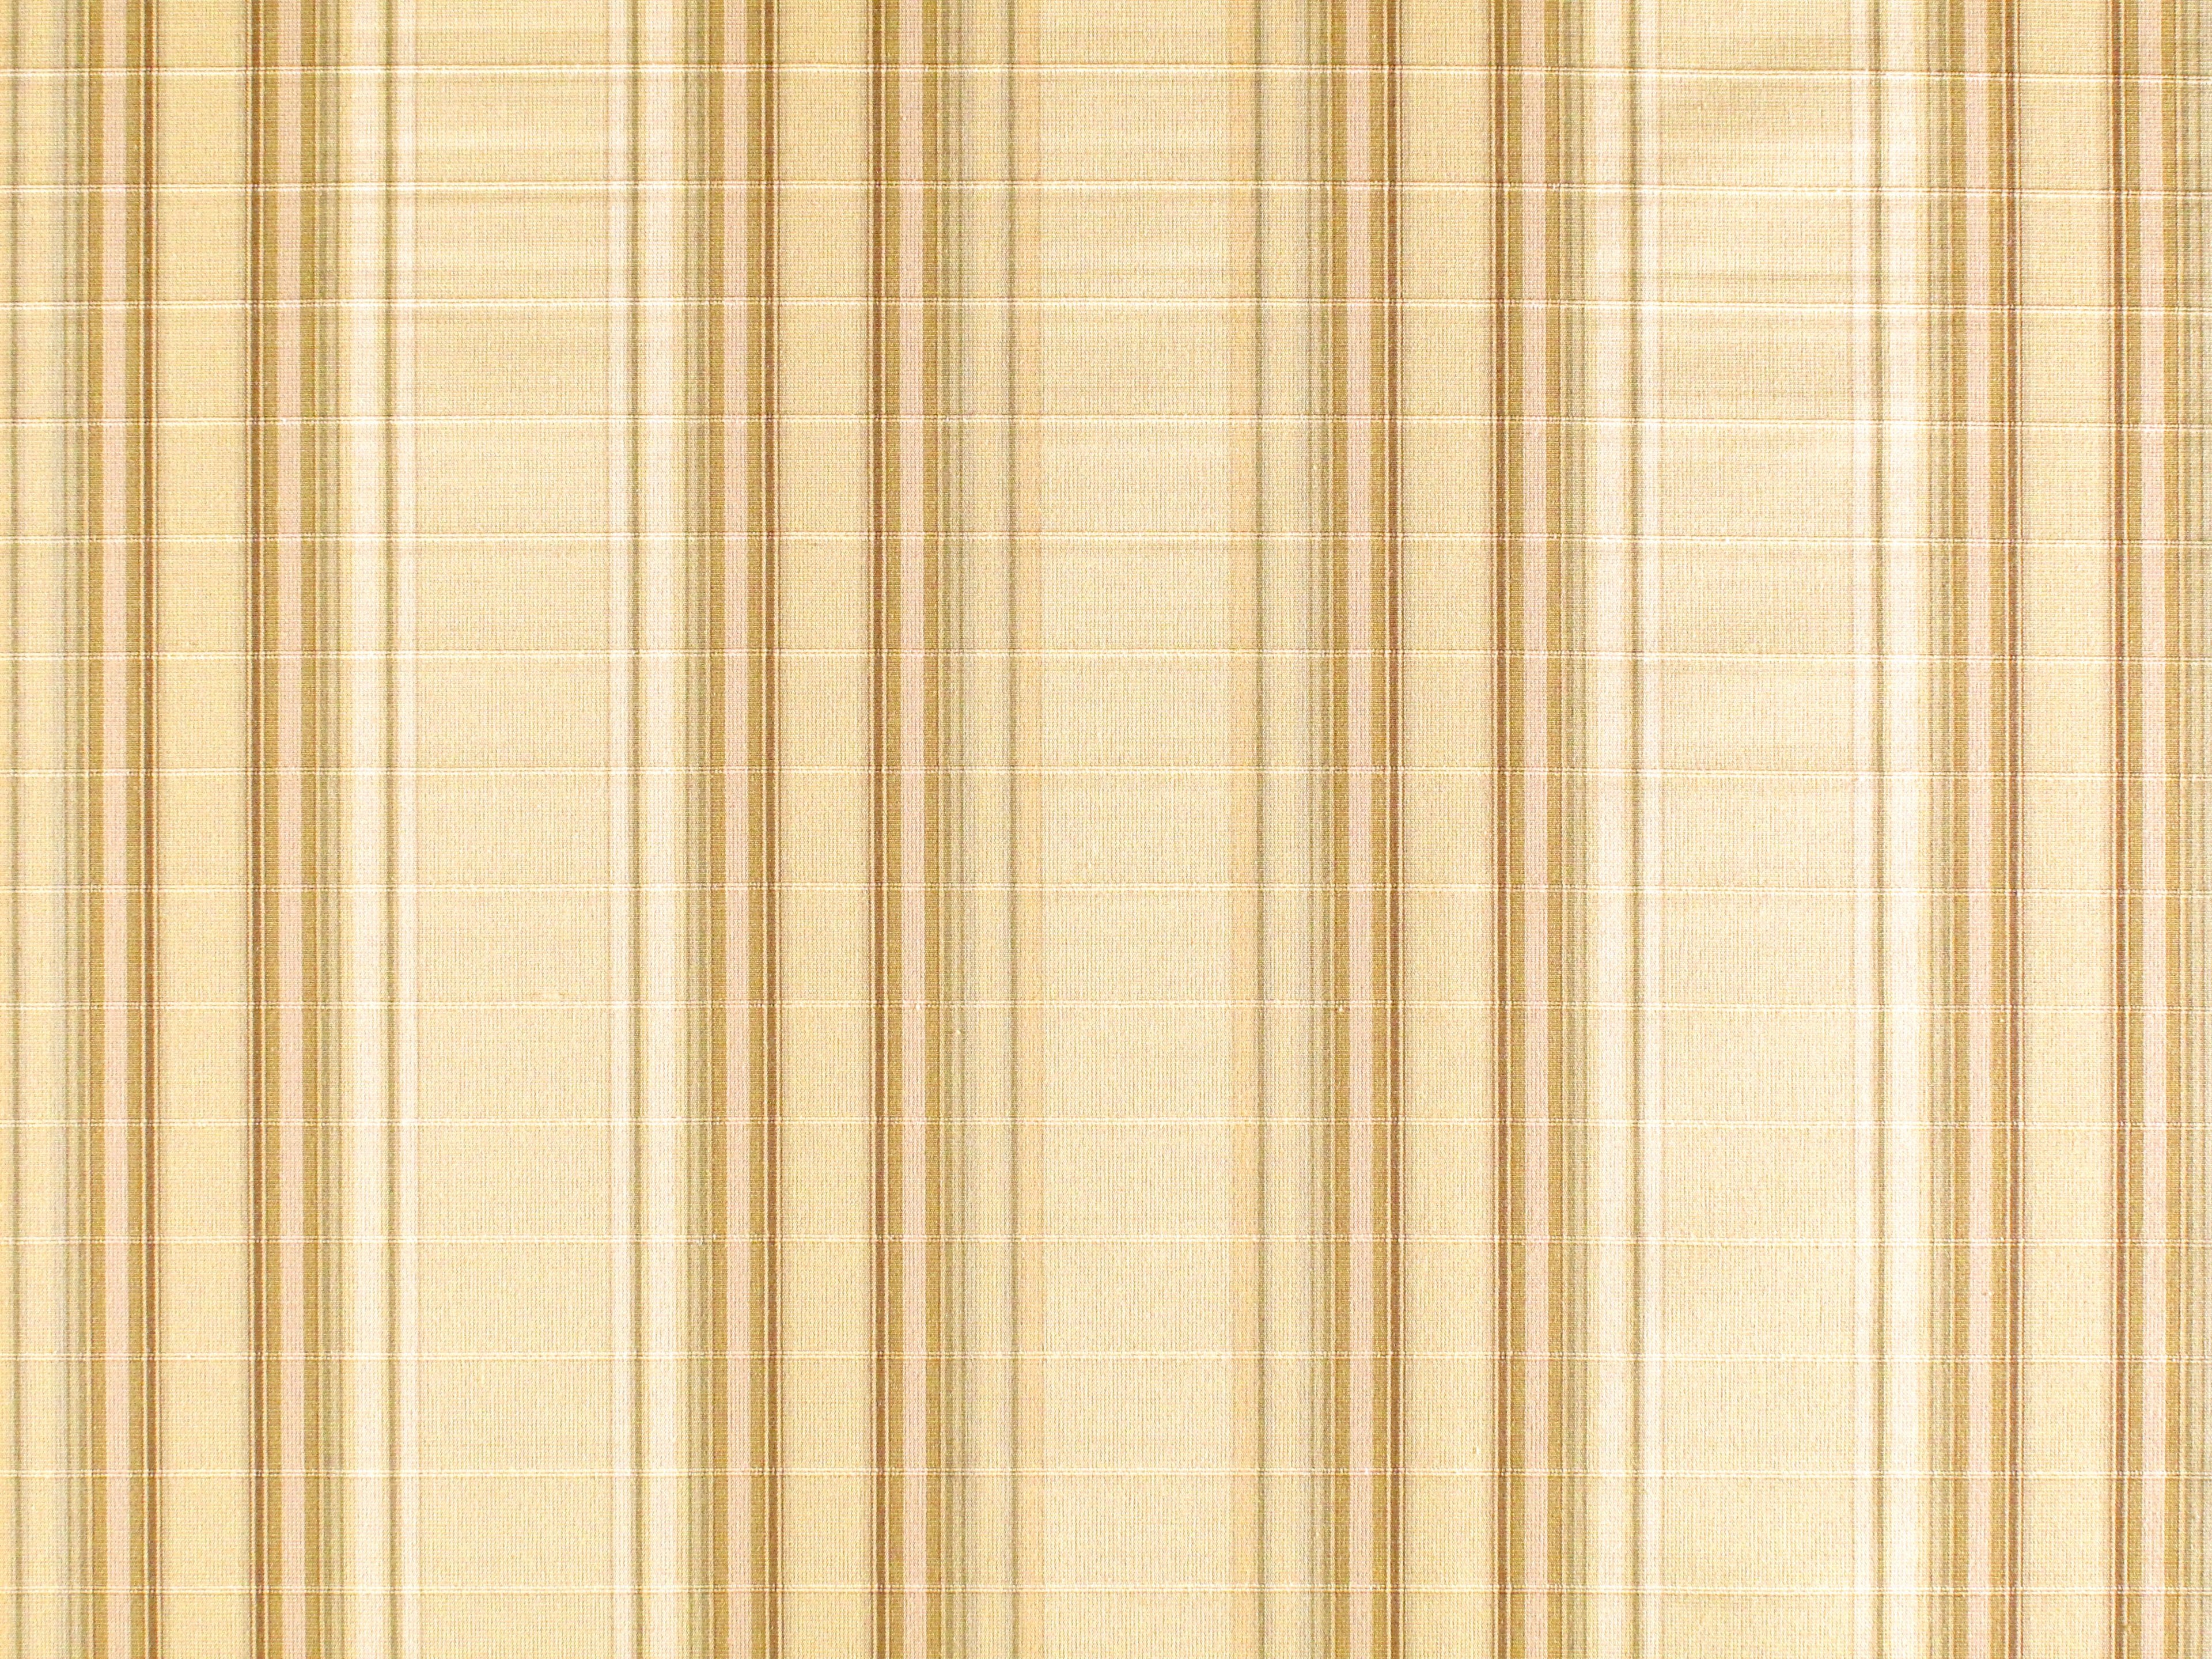 Cordina Stripe fabric in tan color - pattern number DY 00010211 - by Scalamandre in the Old World Weavers collection